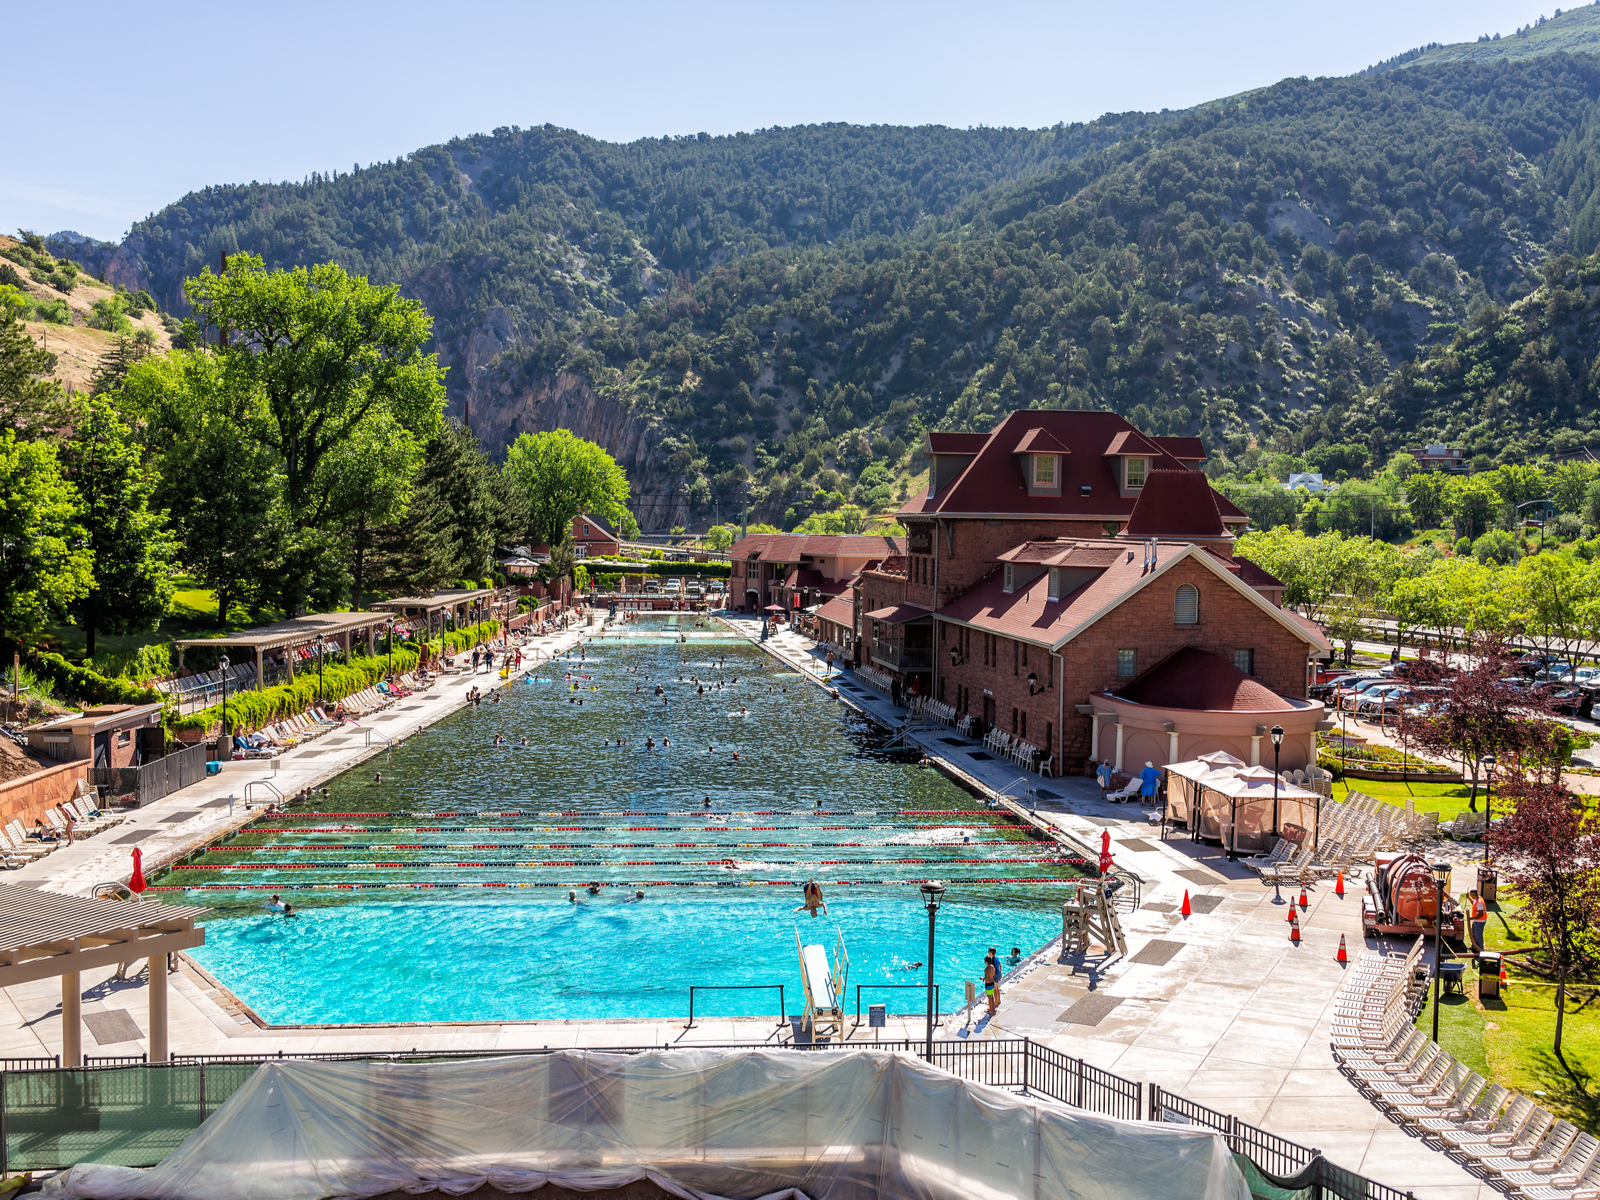 Exterior photo of the Glenwood pool, one of the best hot springs in Colorado, in the Summer